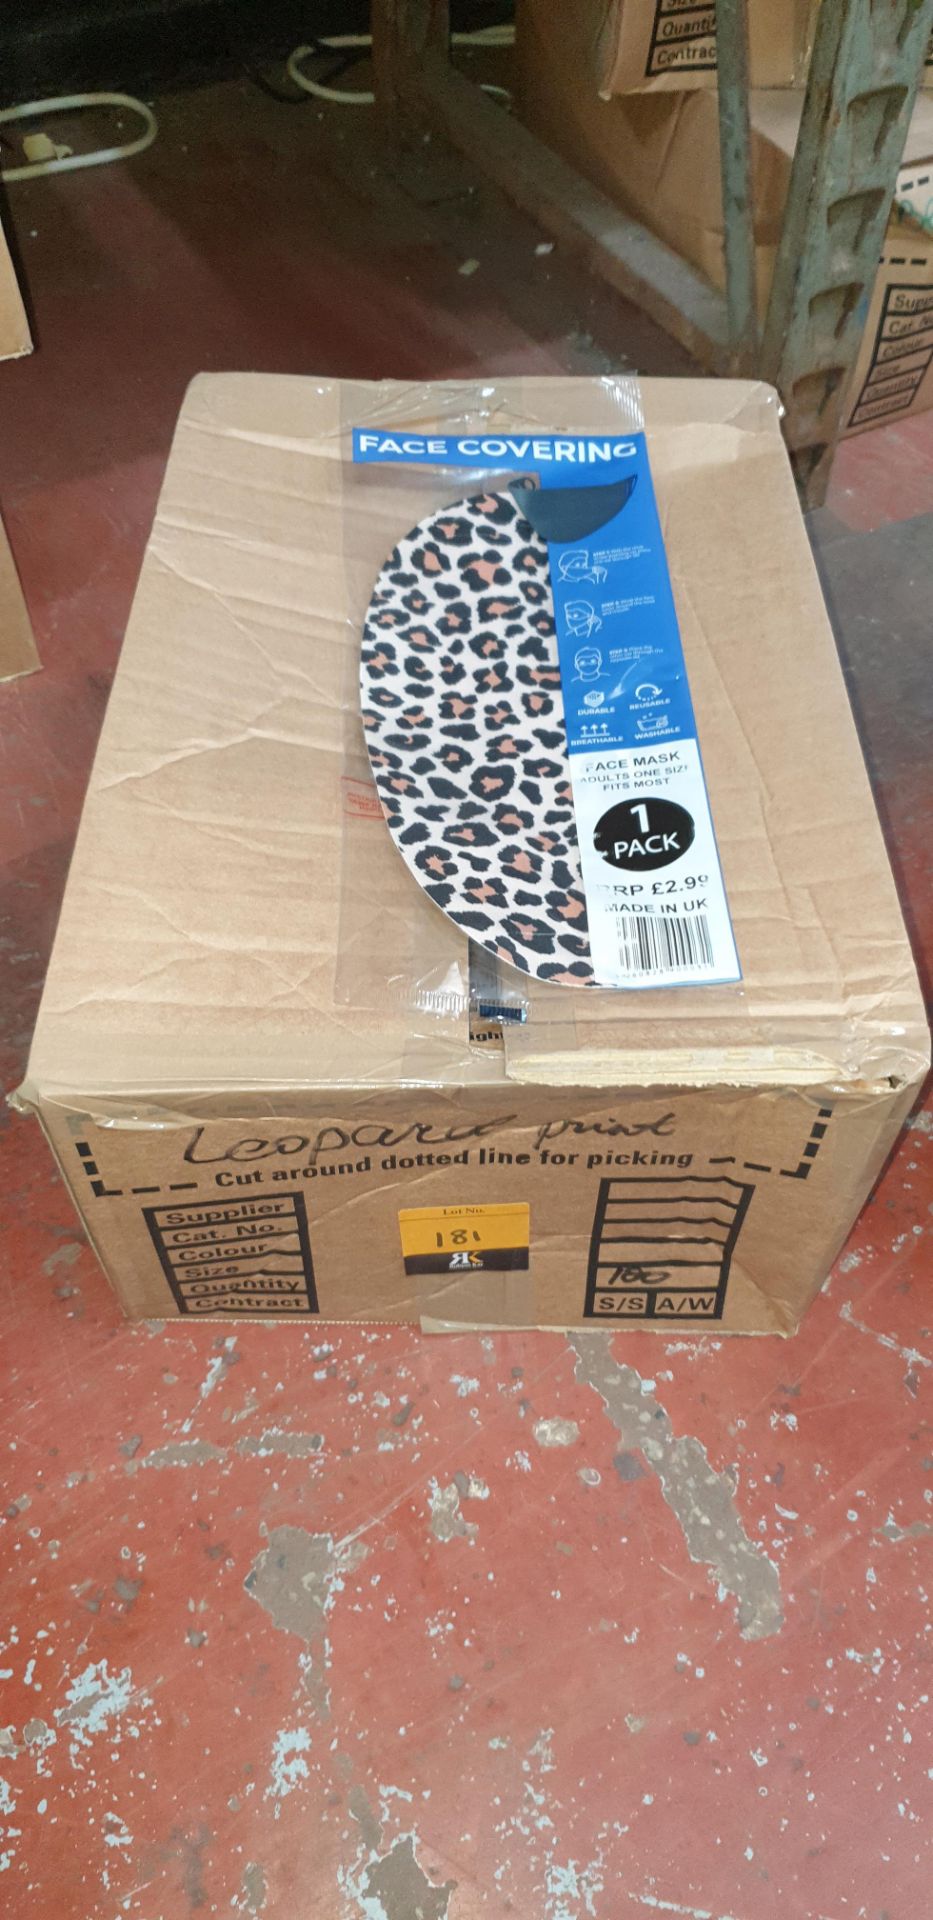 100 off adult face masks, individually packaged, in leopard print - Image 4 of 7